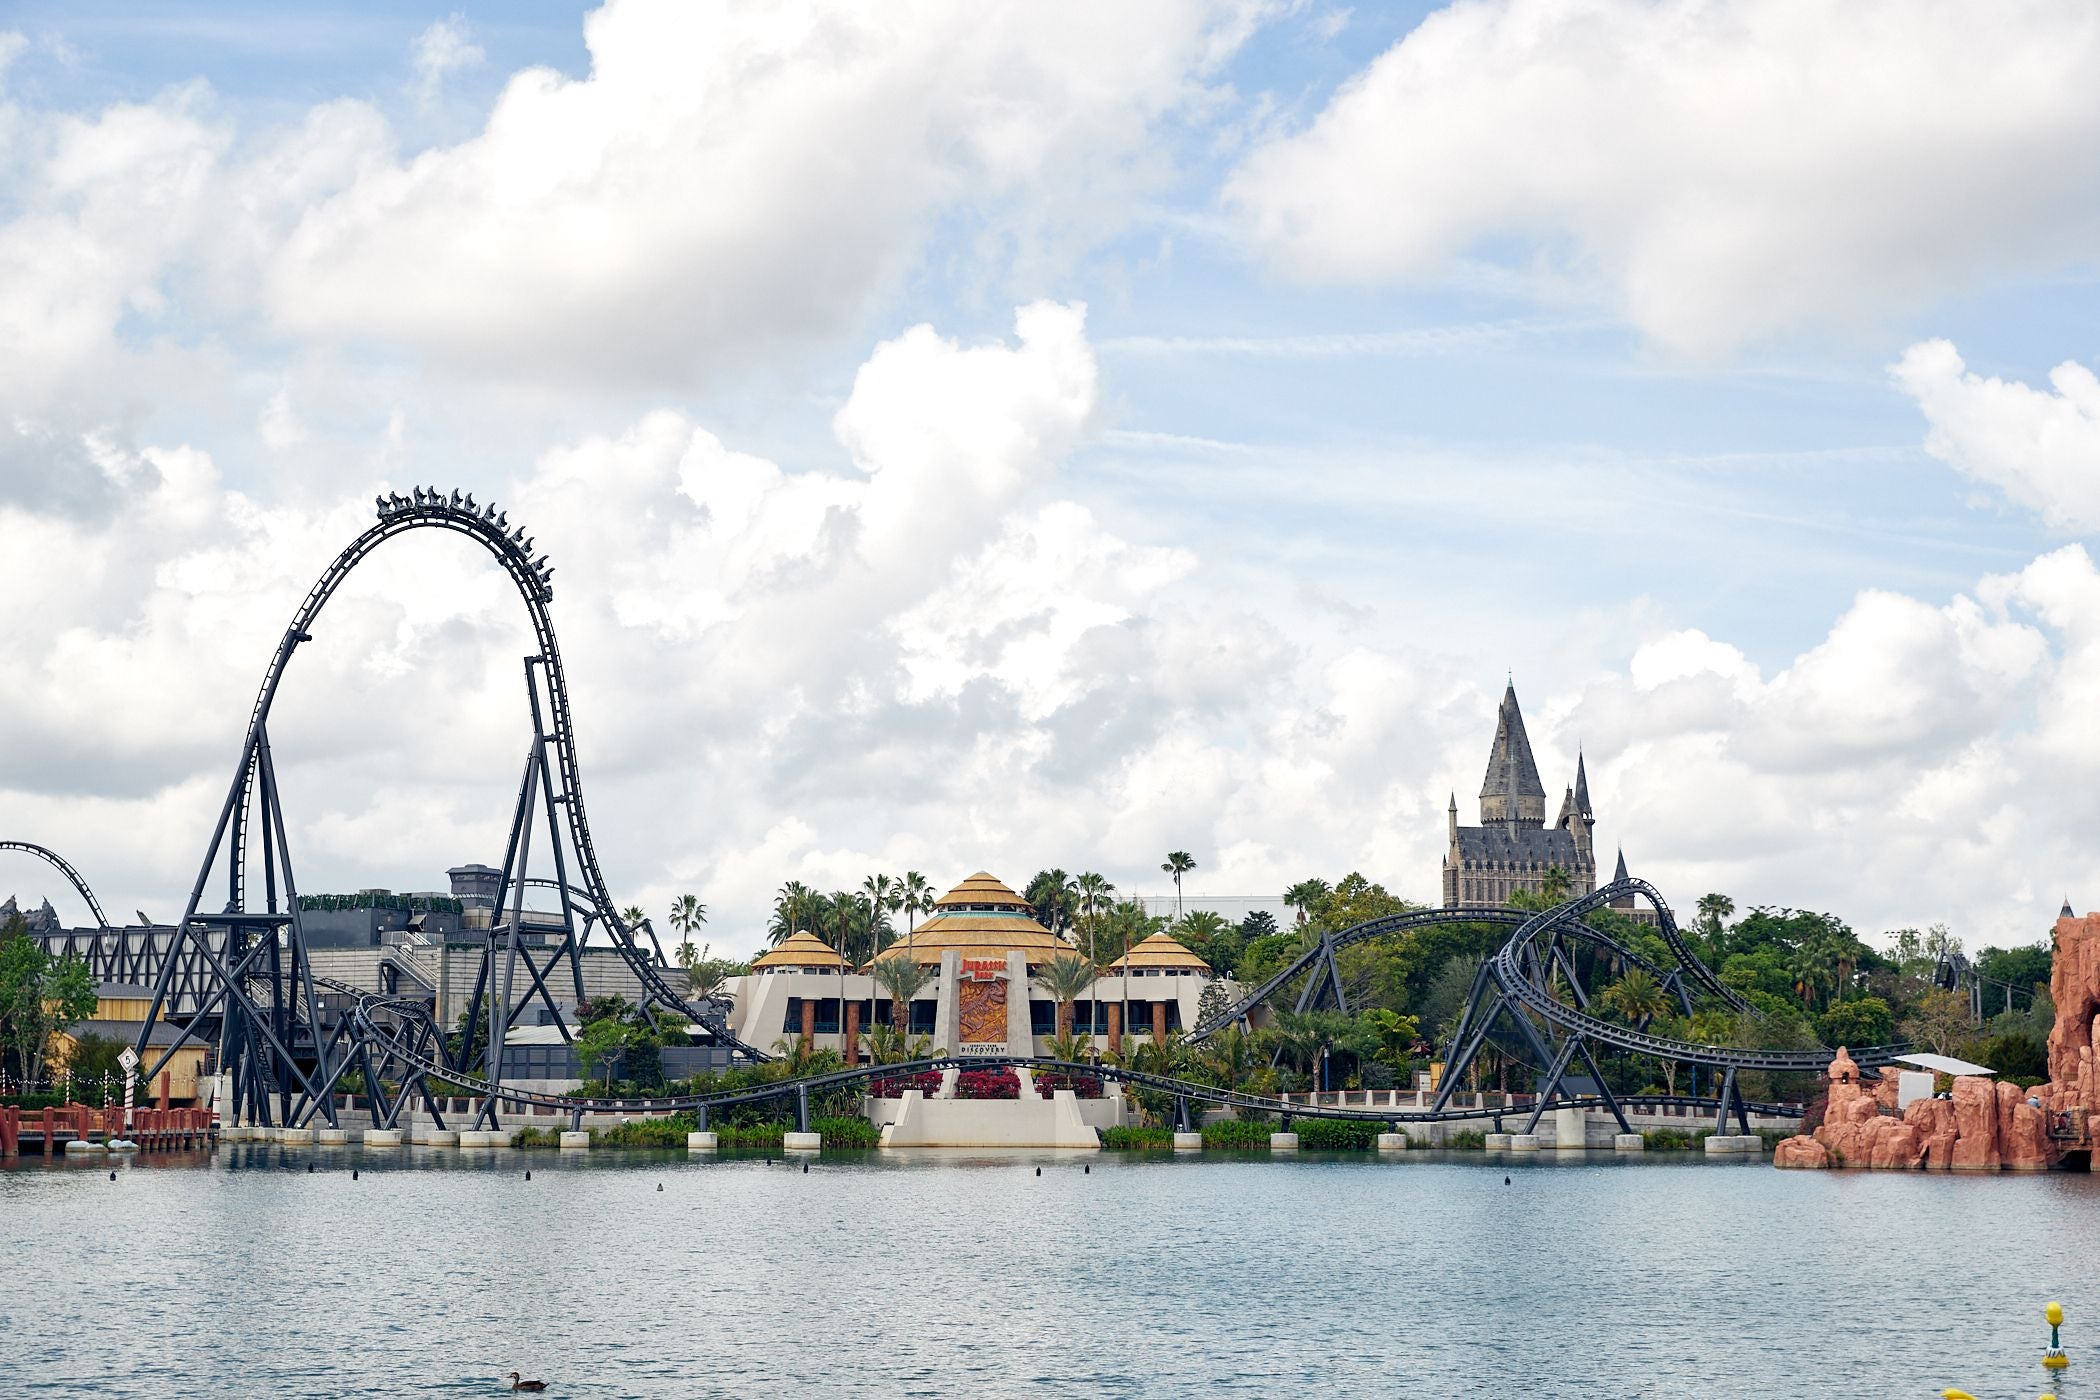 exterior shot of the Jurassic World velocicoaster from across the lagoon